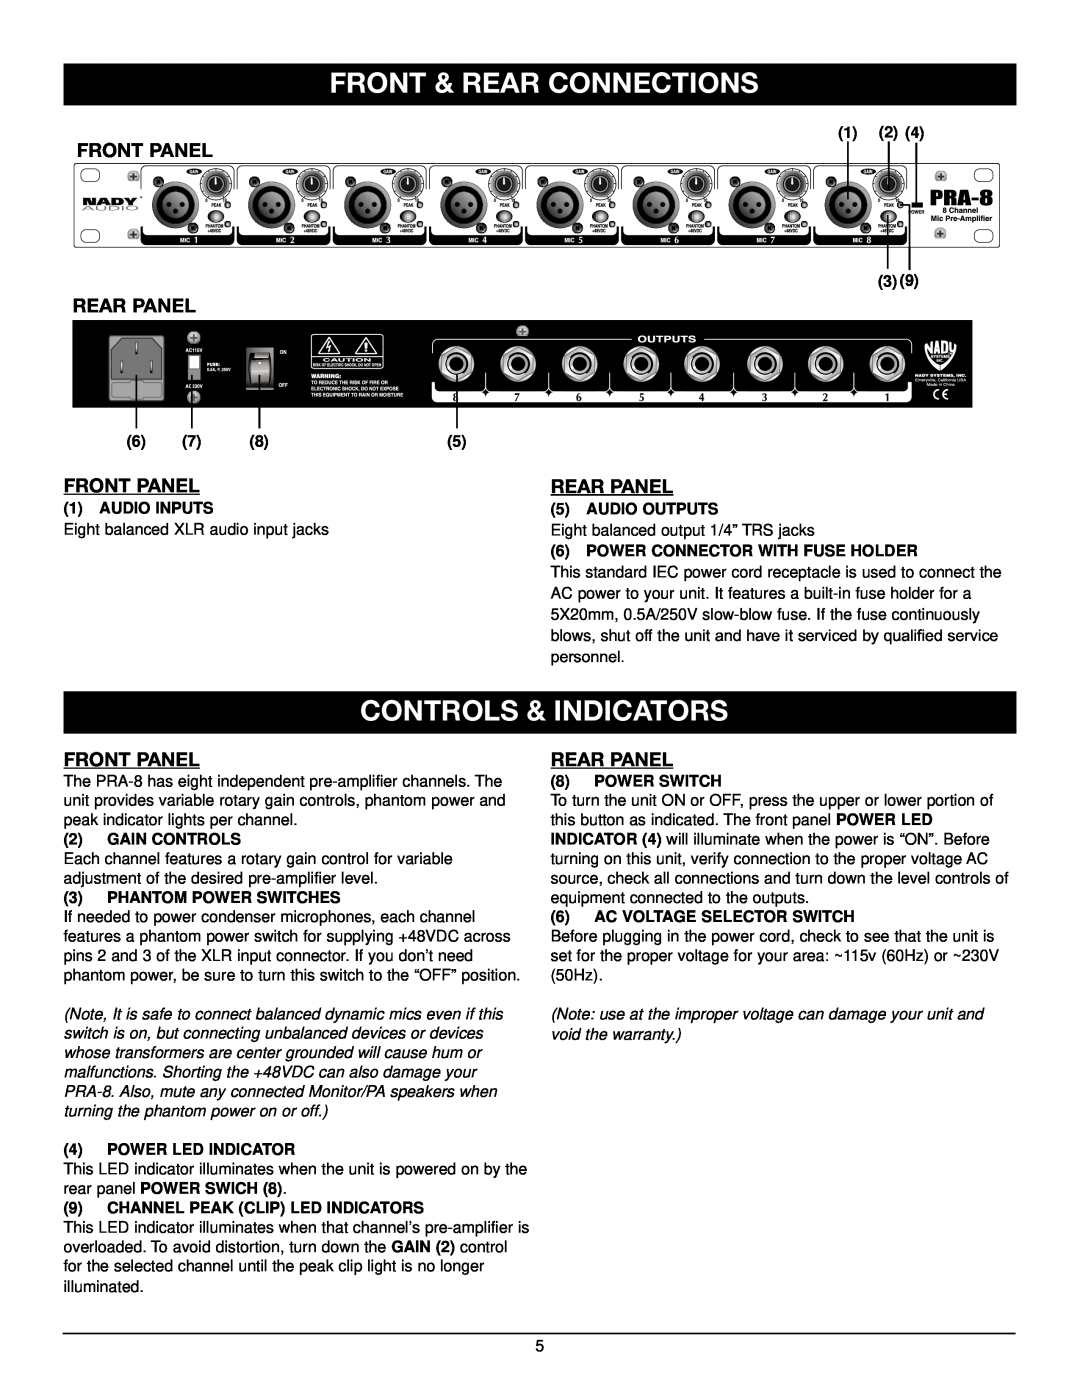 Nady Systems PRA-8 owner manual Front & Rear Connections, Controls & Indicators, Front Panel, Rear Panel 